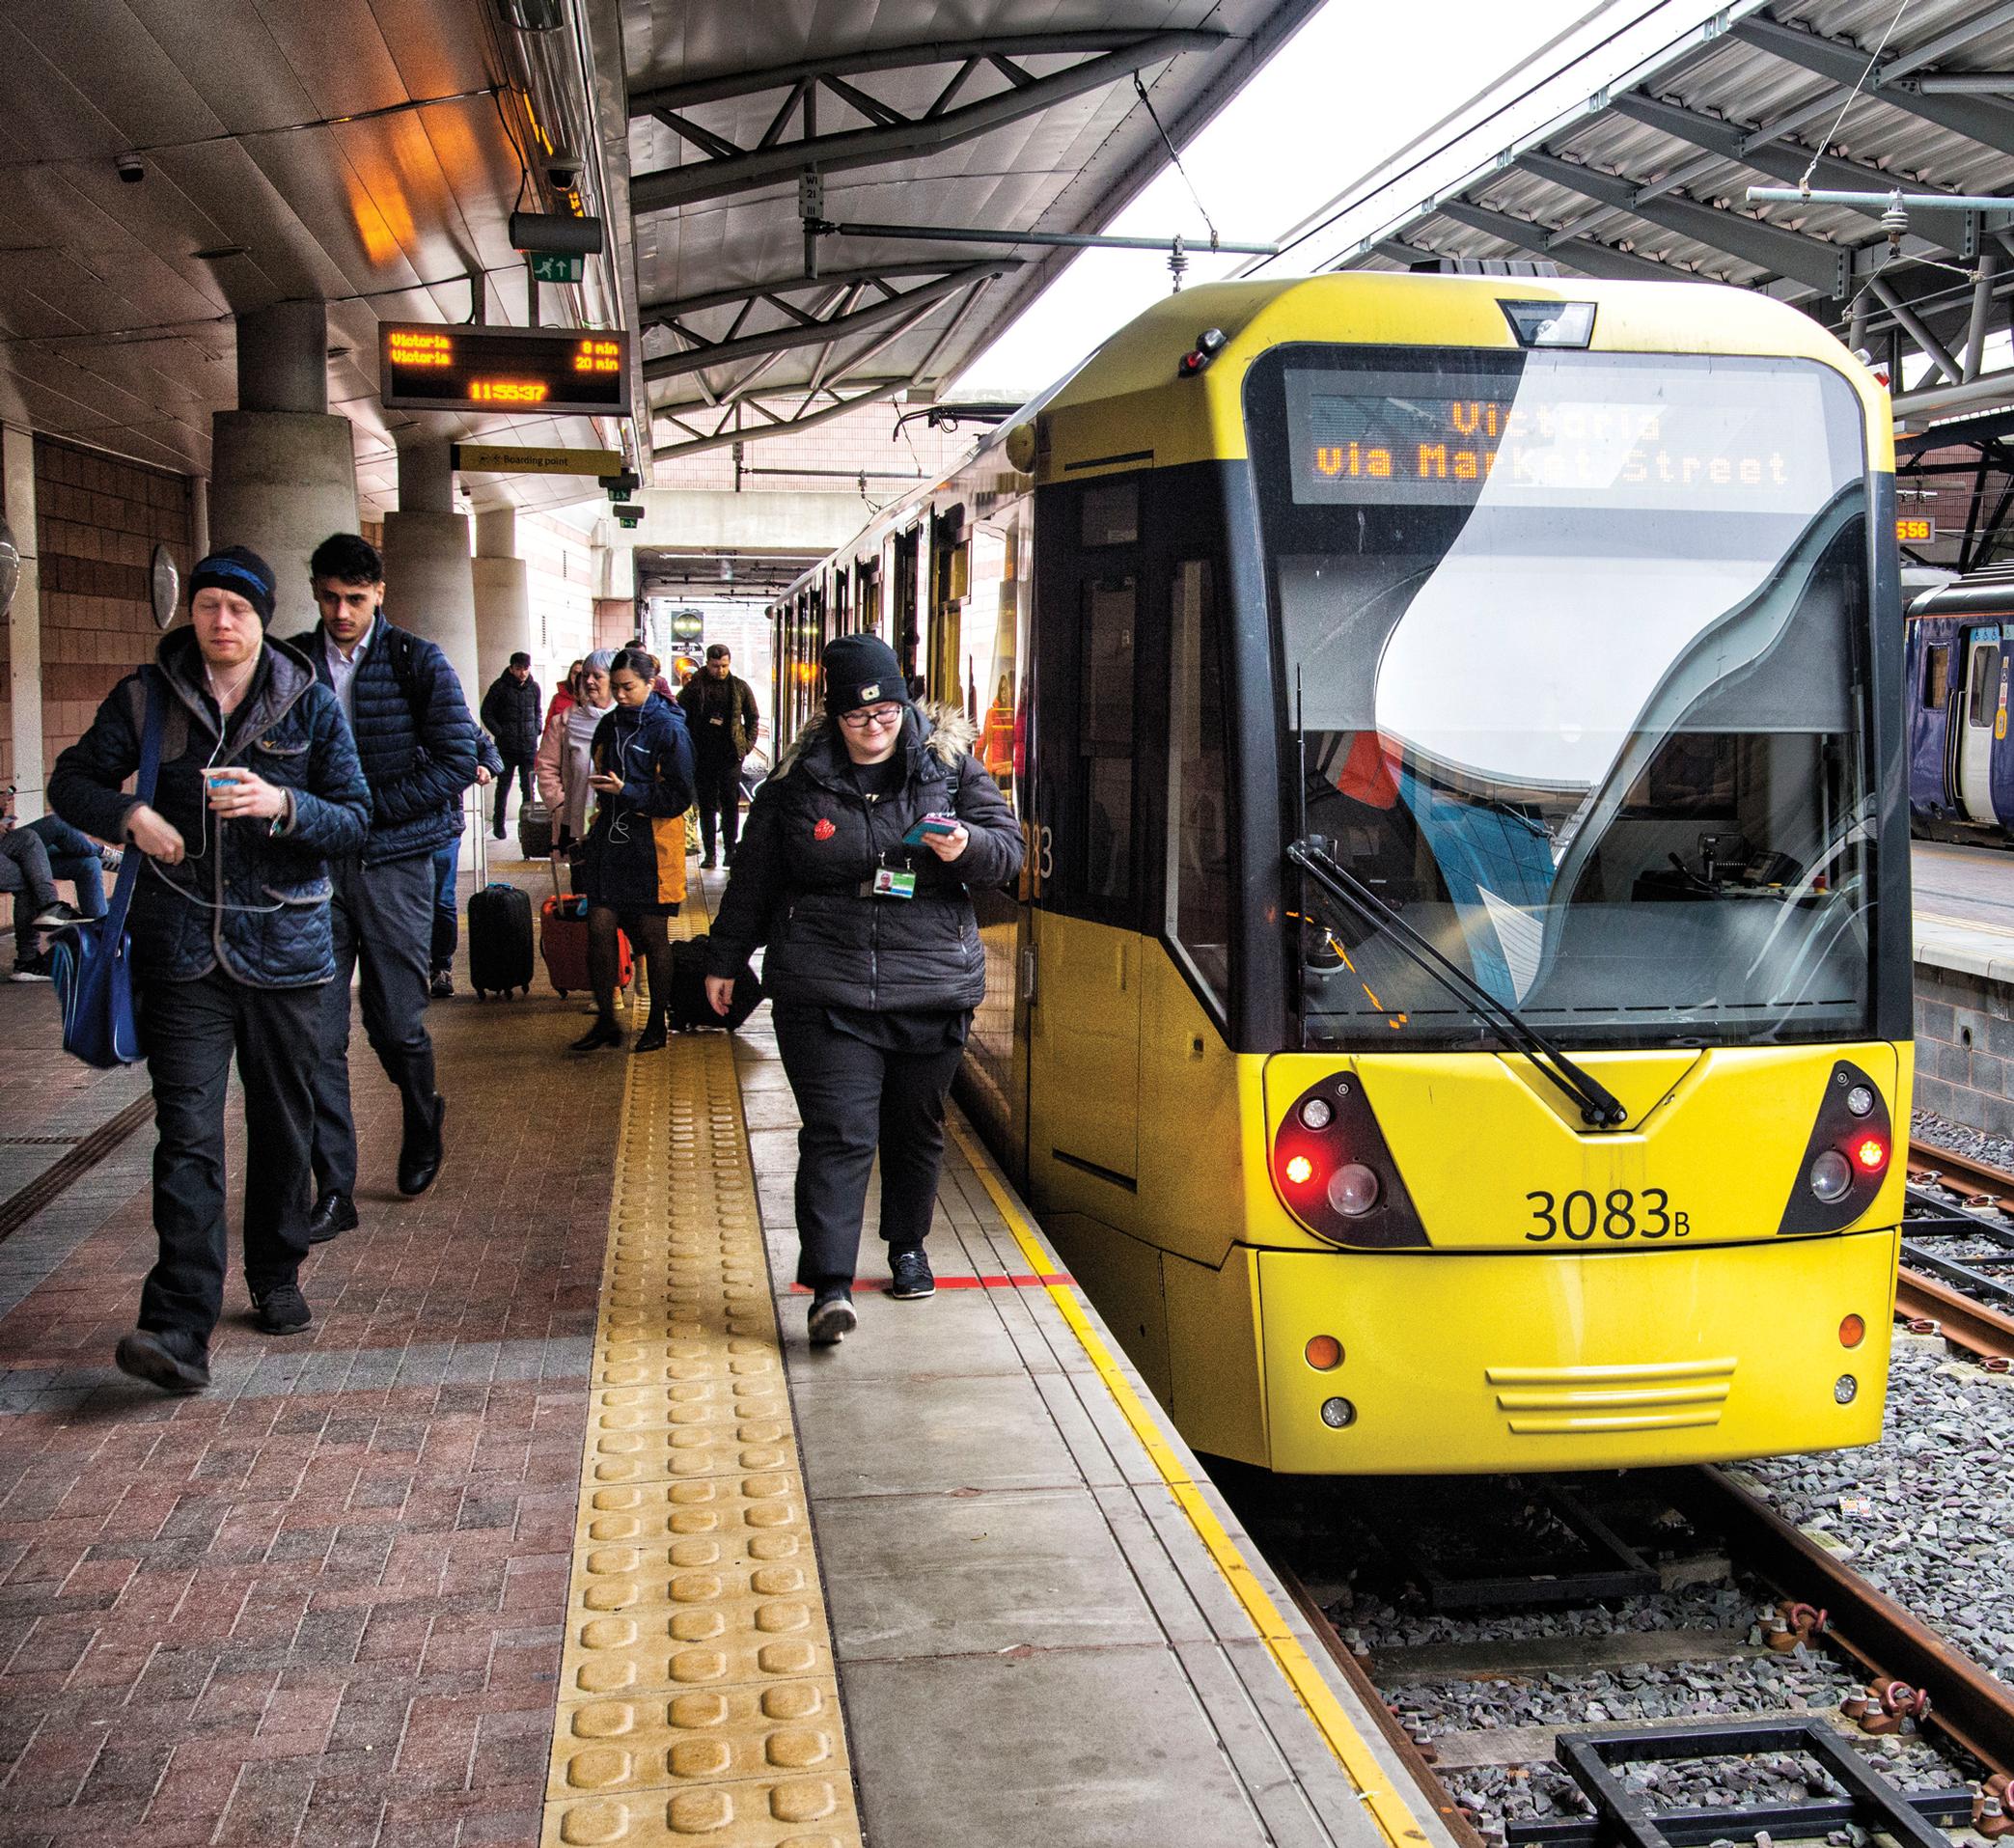 More than 10,000 incomplete journeys were recorded on Metrolink in first 10 days of contactless ticketing